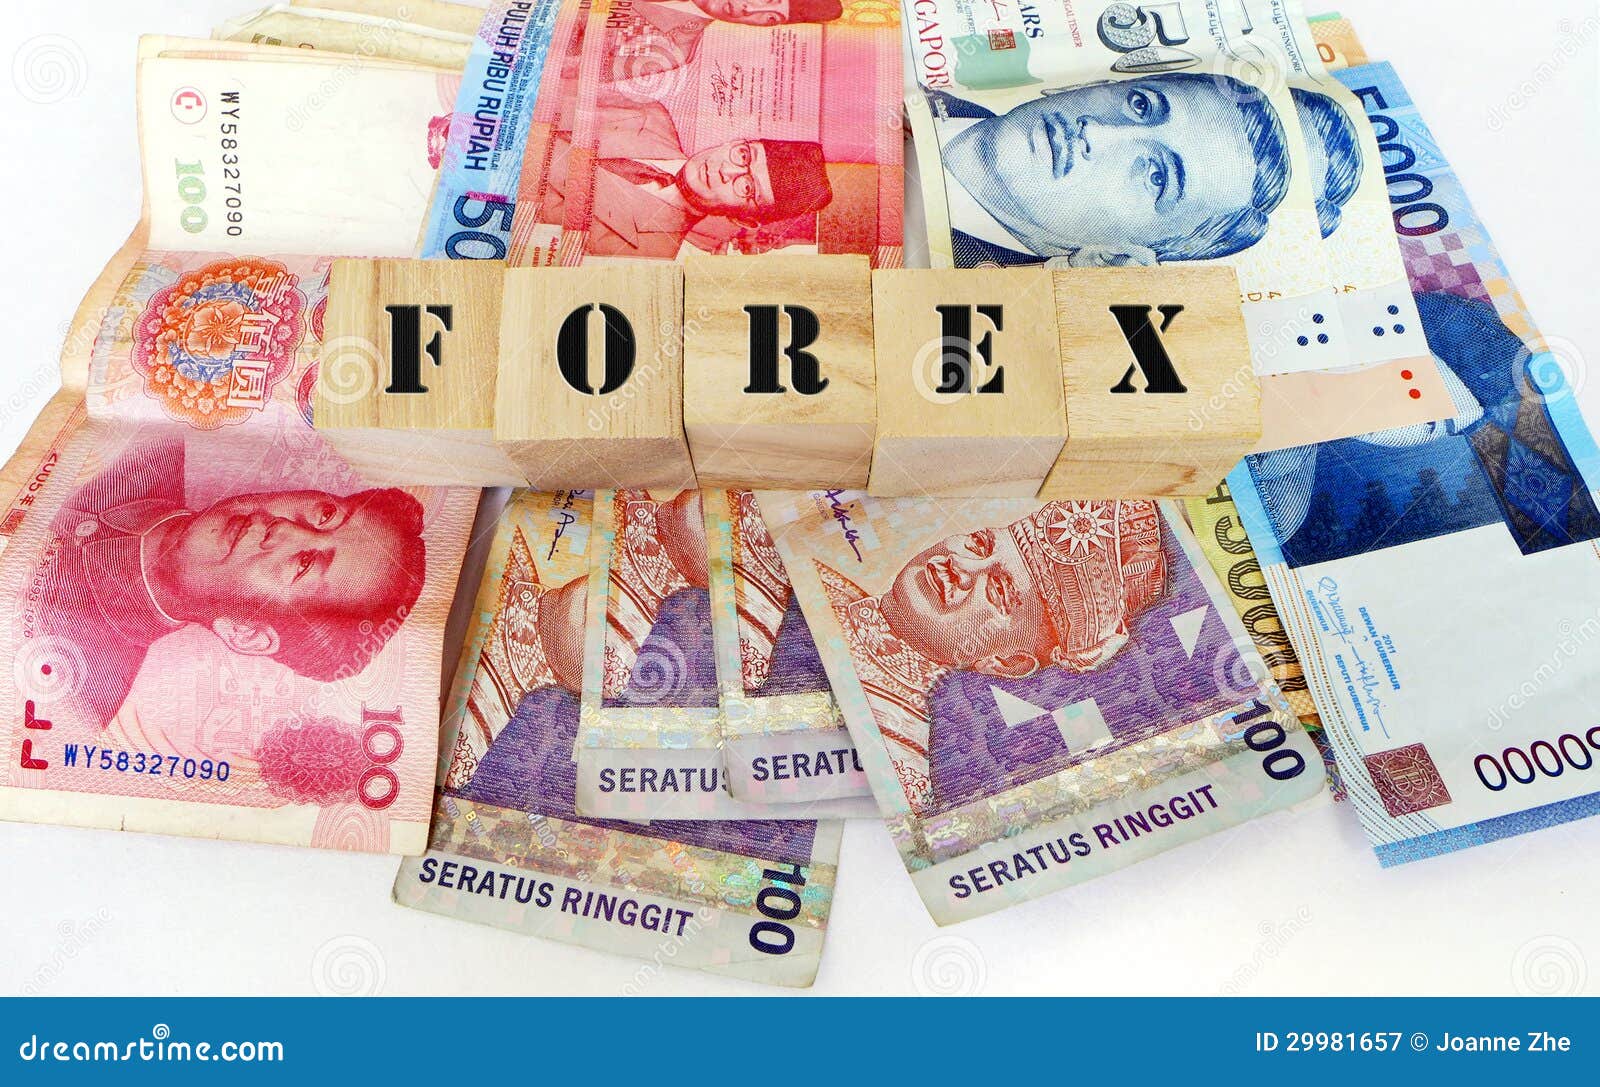 Forex asian time